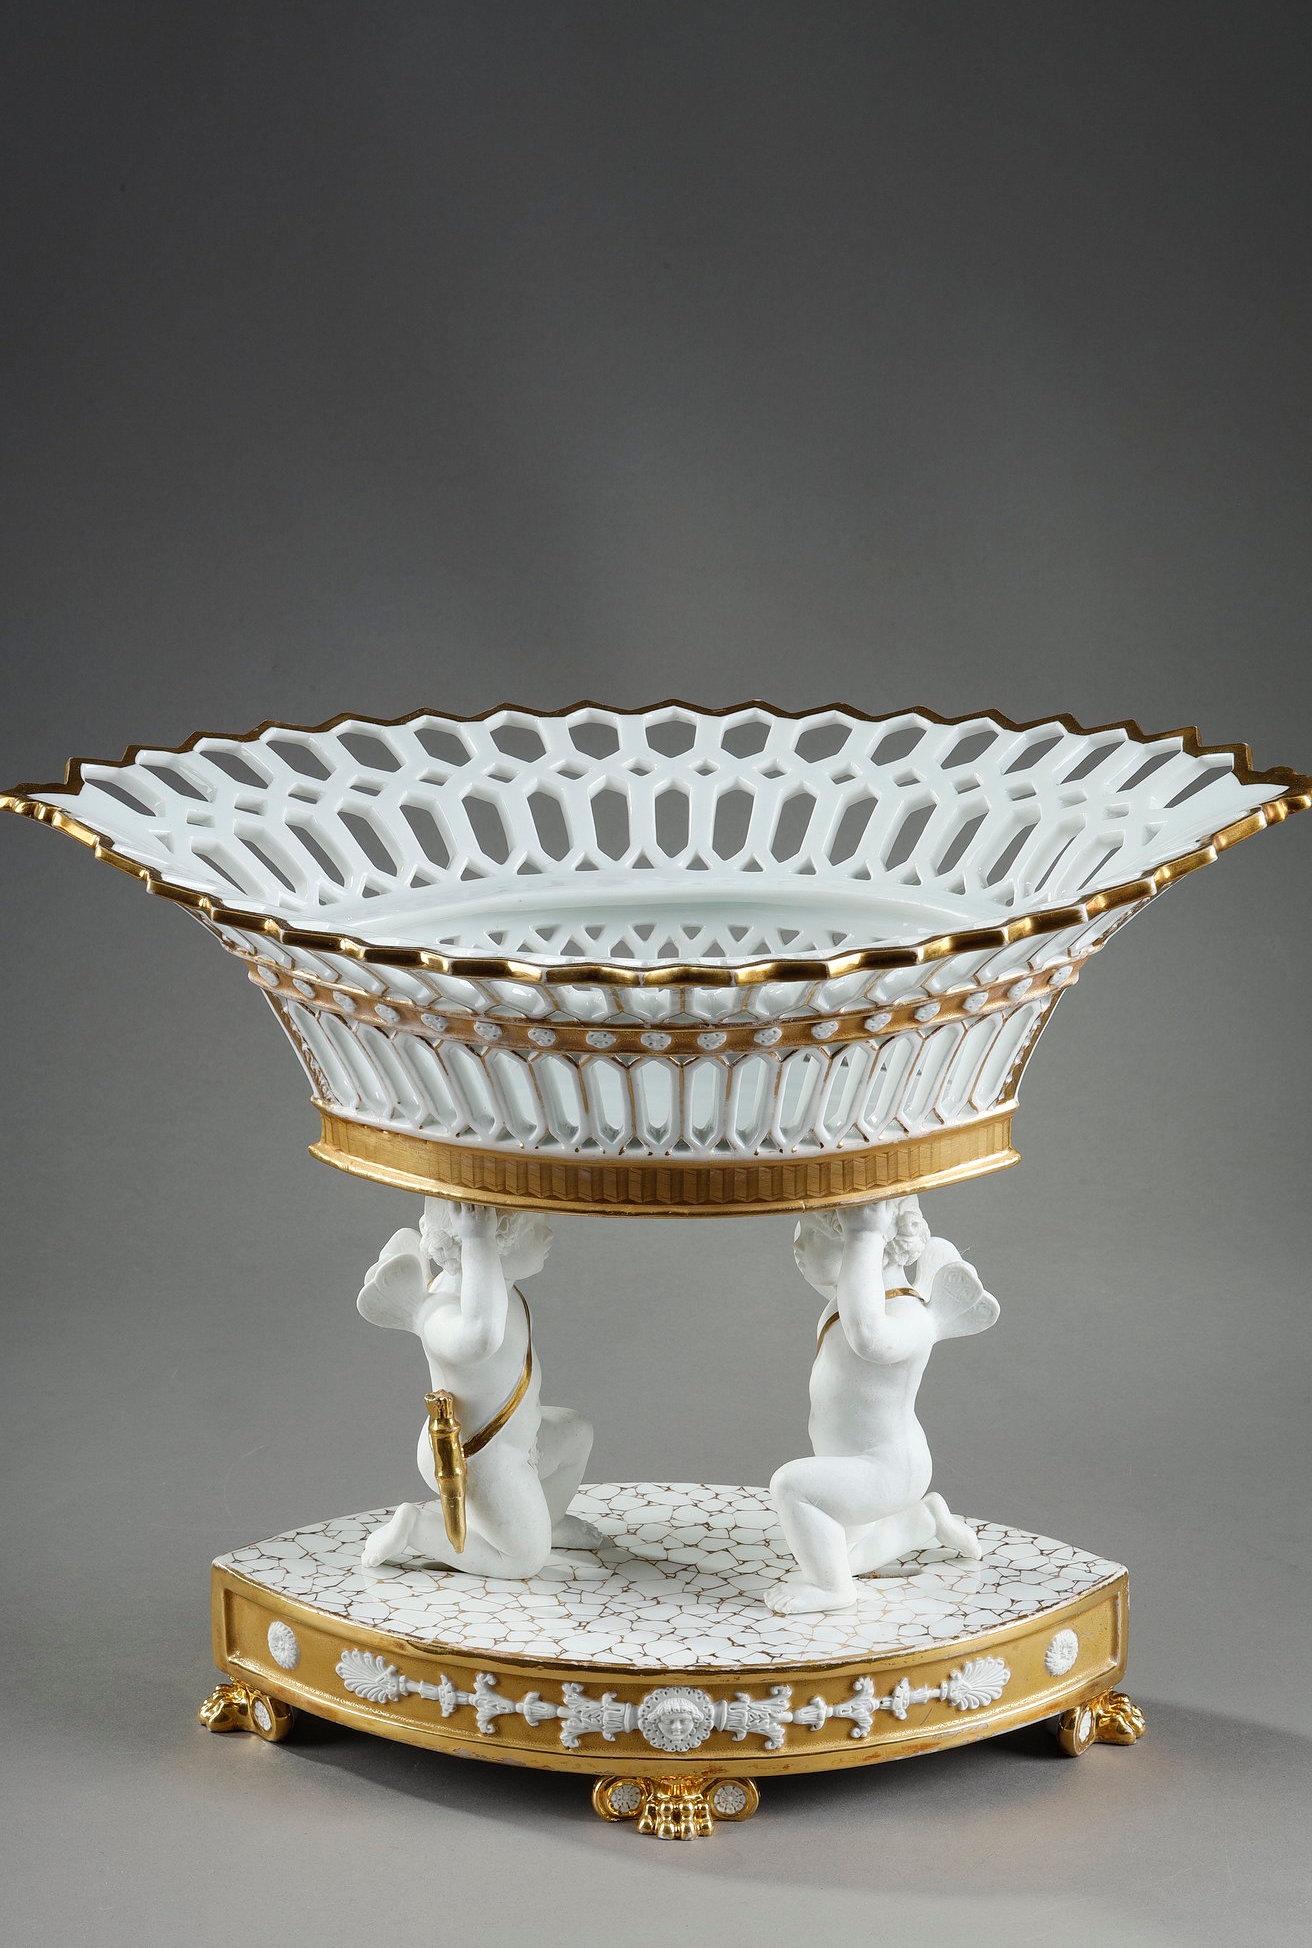 Very large navette-shaped basket in white openwork porcelain with gold highlights, resting on two kneeling cupids carrying their quivers, on a base of the same shape and standing on claw or lion's paw feet. The oblong base is decorated on both sides